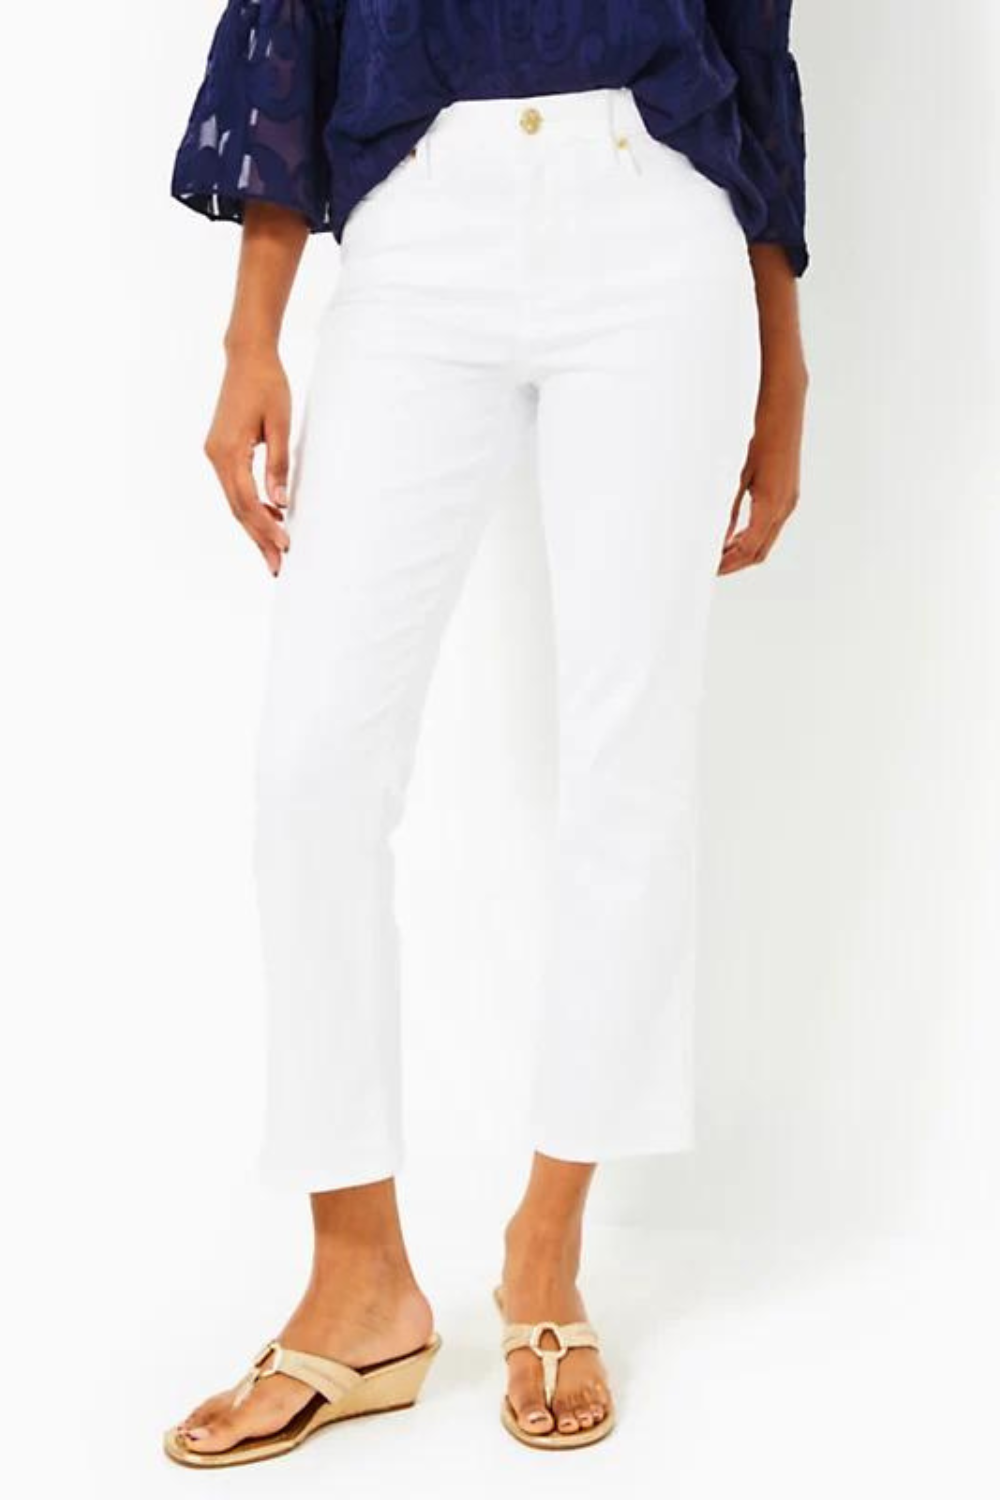 Lilly Pulitzer Annet High Rise Crop Flare Jeans - Resort White